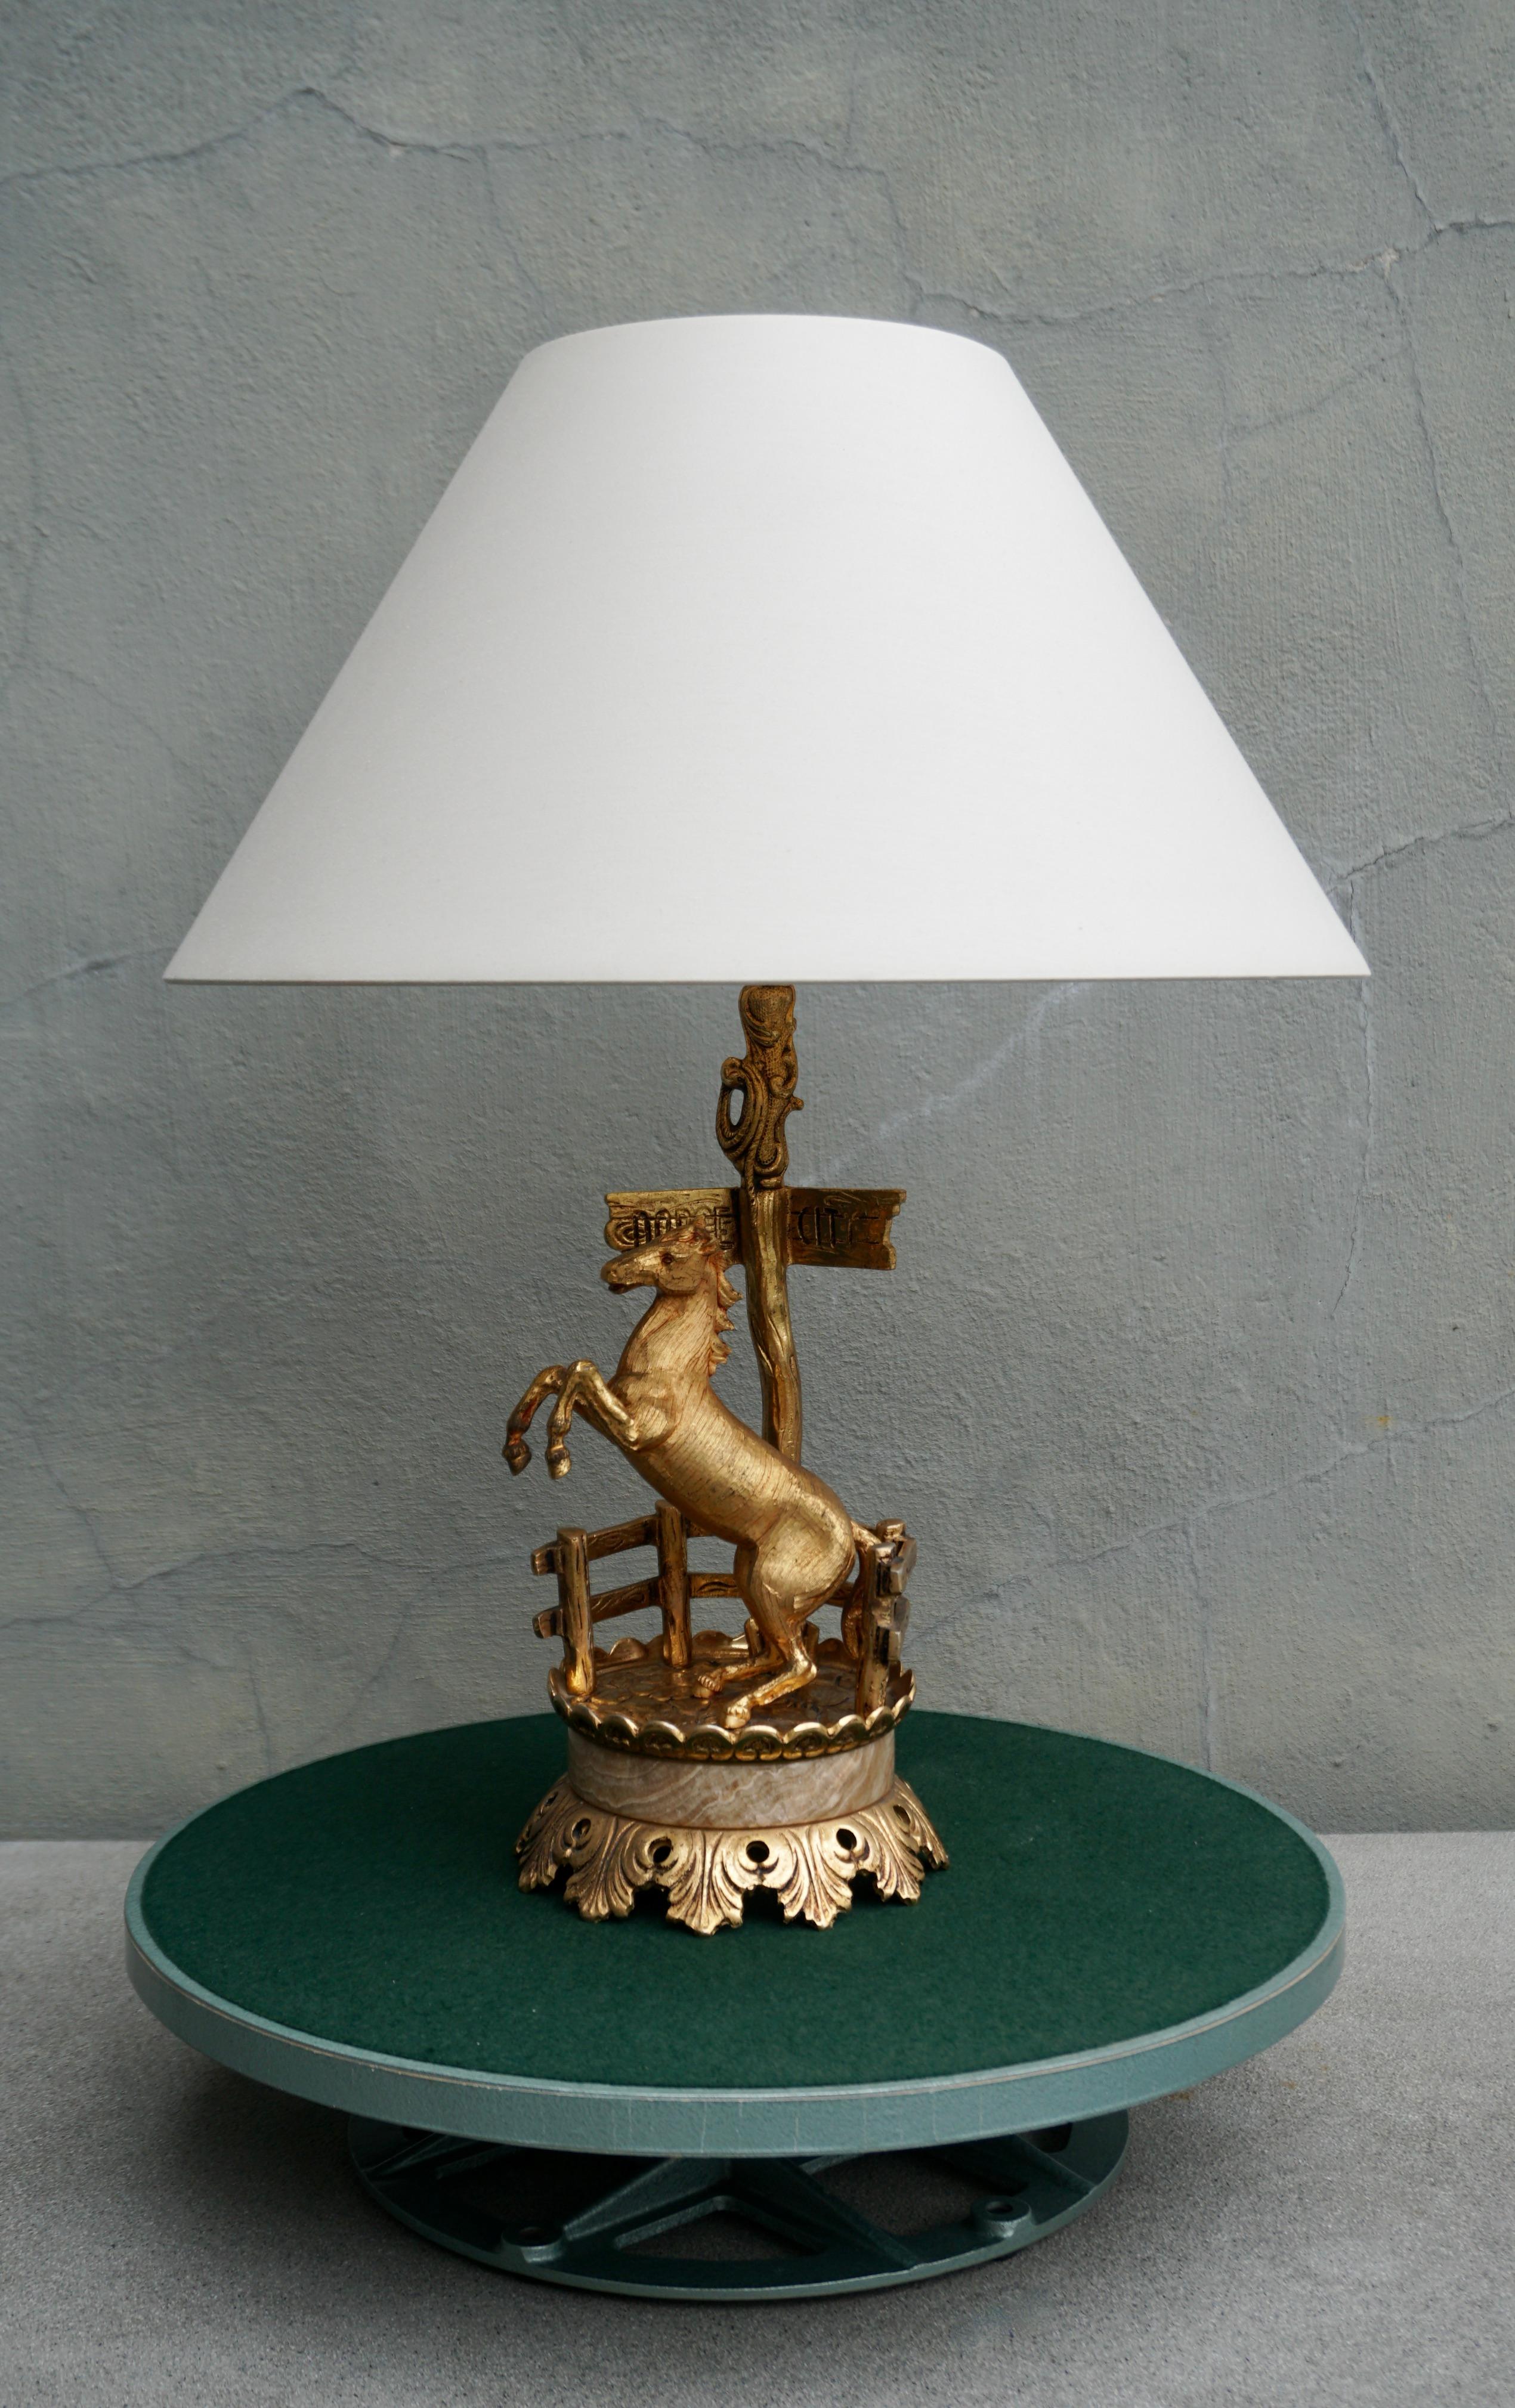 Rare Mid century bronze wilde west horse lamp.

Dodge City is a city in Ford County, Kansas, USA. In the days of the Wild West it was an illustrious place; for example, the legendary Wyatt Earp and Bat Masterson were deputies there for some time.